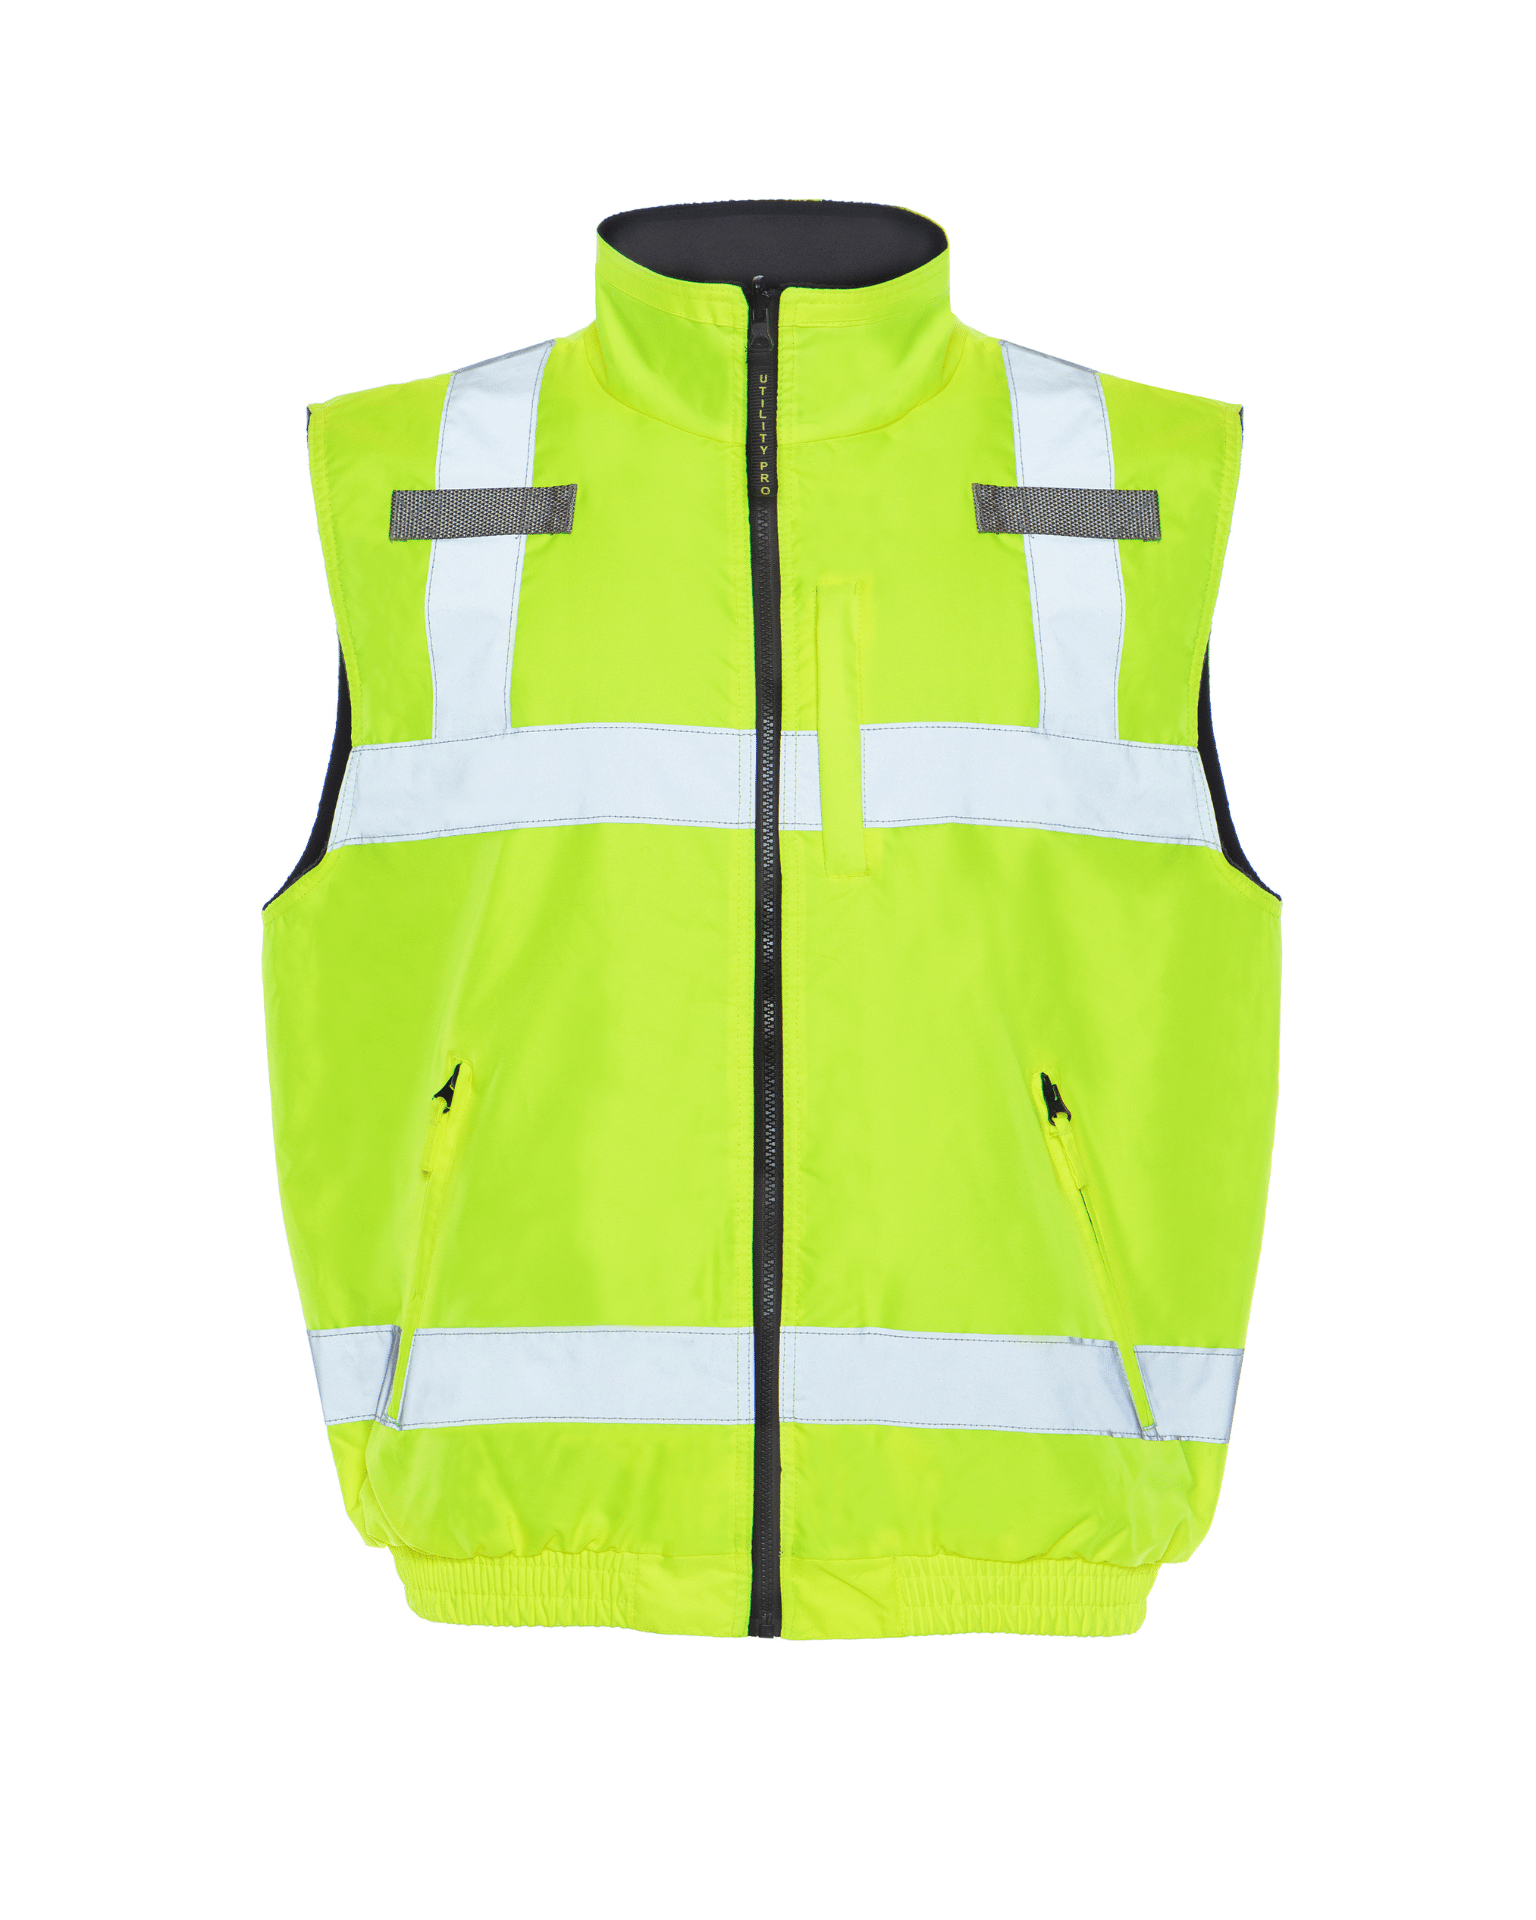 Utility Pro Wear High Visibility Tee & Vest UHV1001 HiVis Full Zip Reversible Insulated Vest